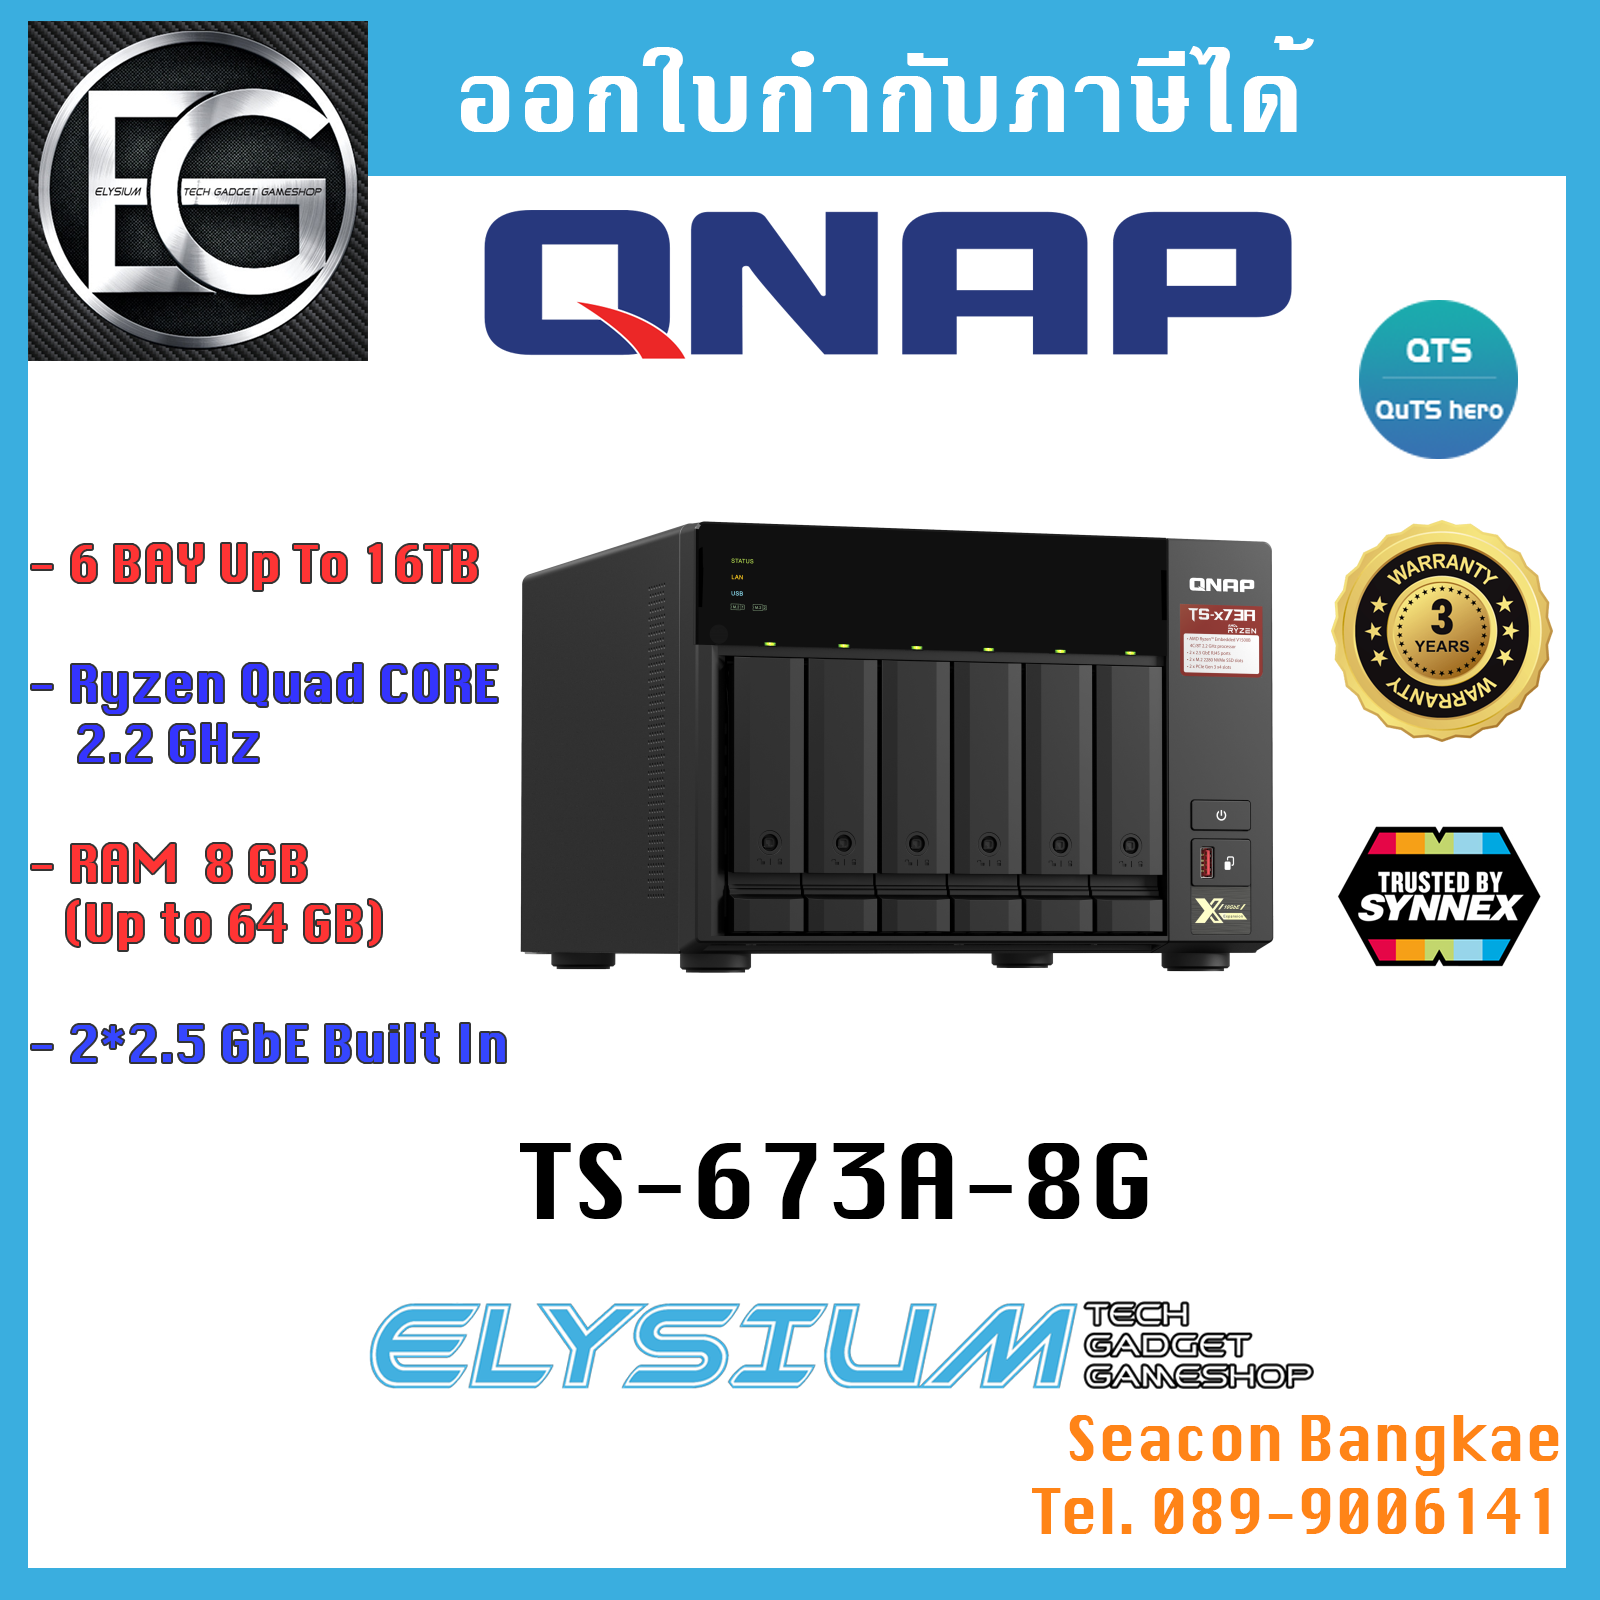 QNAP TS-673A AMD Ryzen™ quad-core 2.2 GHz 2.5GbE NAS supports M.2 NVMe SSD and PCIe expansion ประกันศูนย์ไทย